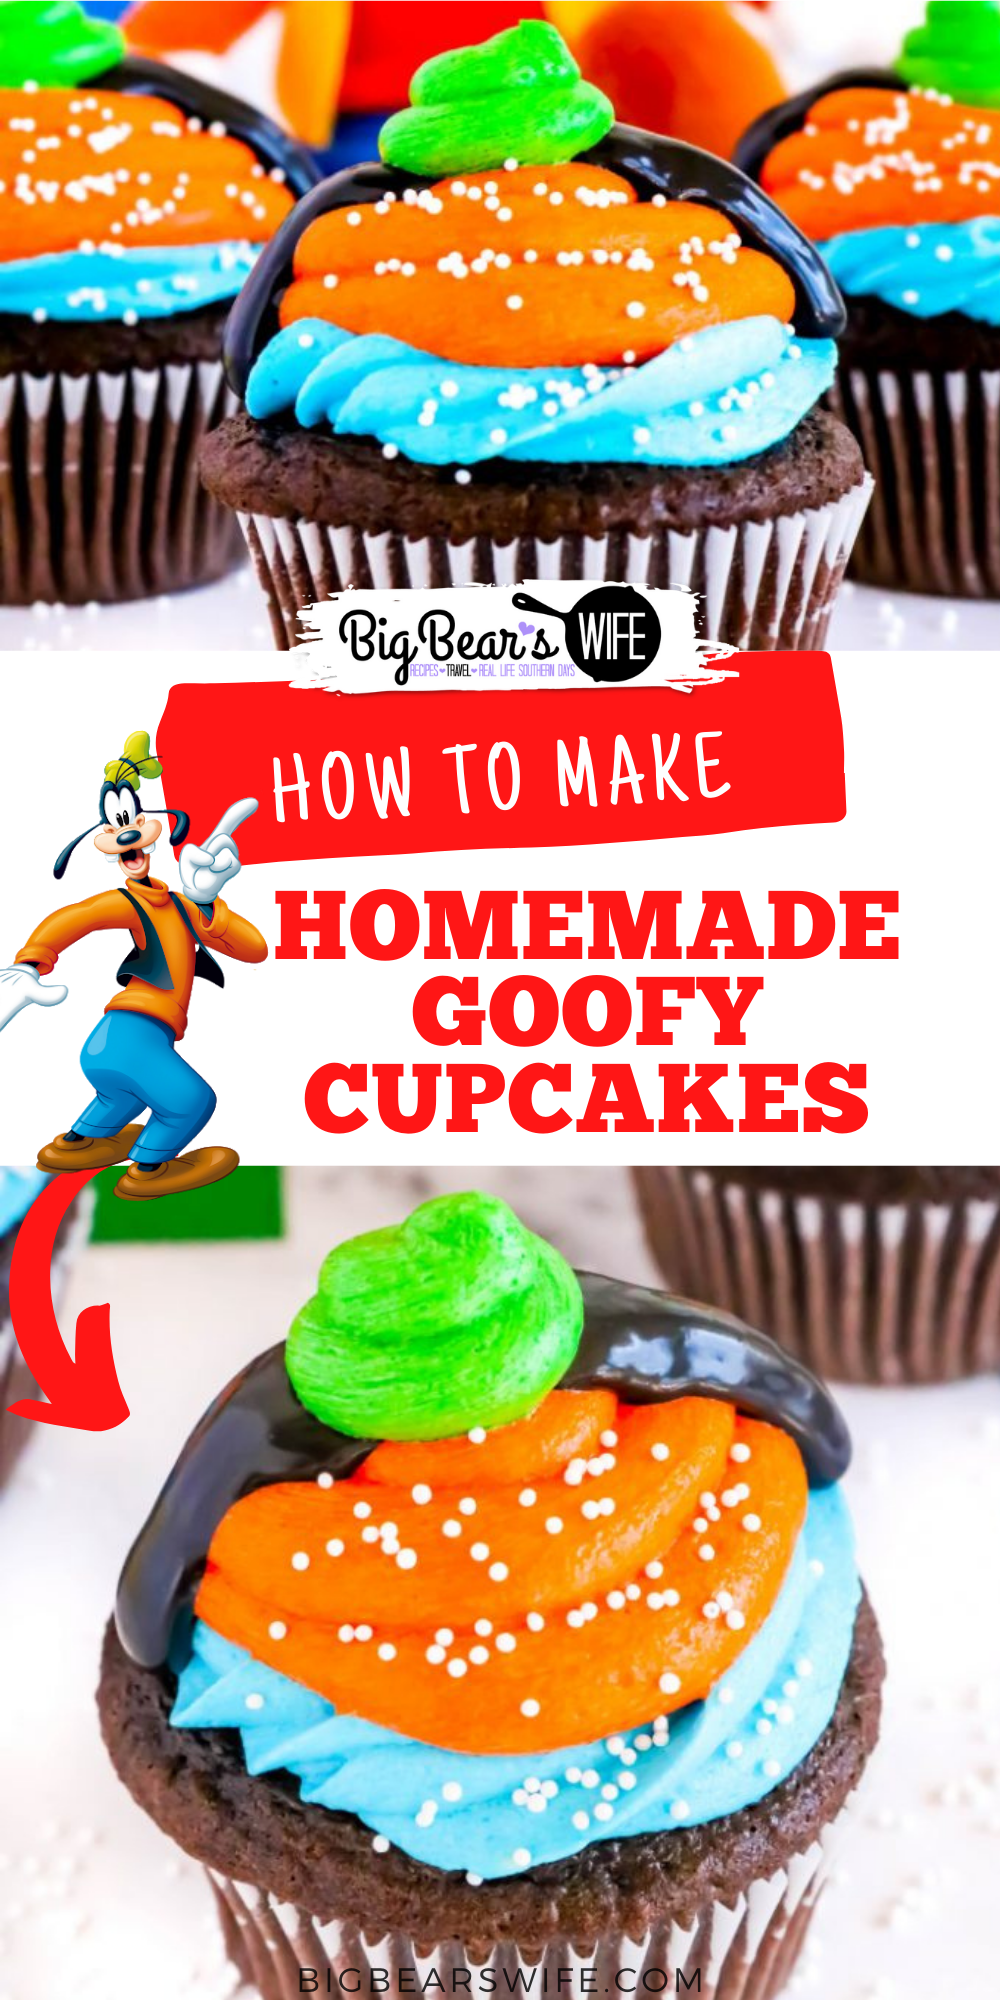 Bring a little bit of Goofy Disney magic into your home with these Disney World inspired Homemade Goofy Cupcakes! via @bigbearswife